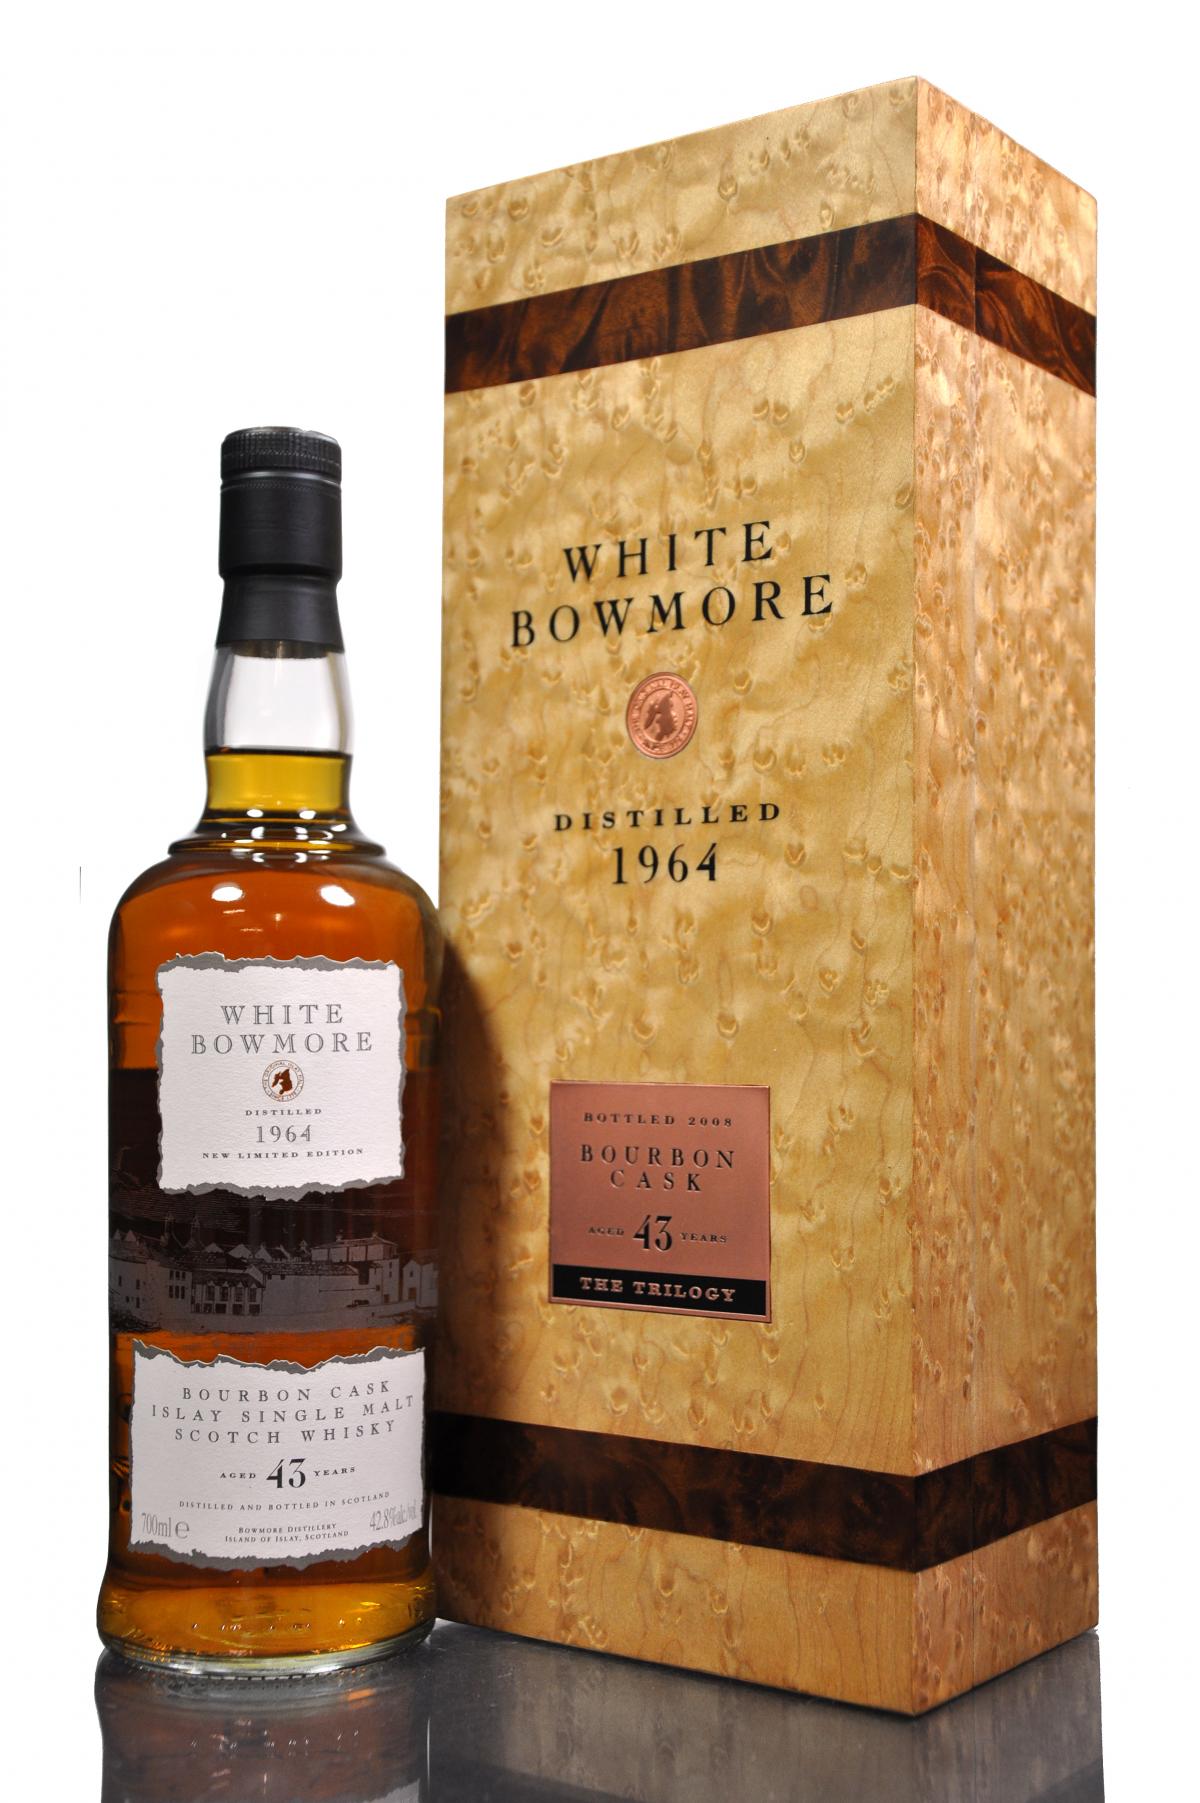 White Bowmore 1964 - 43 Year Old